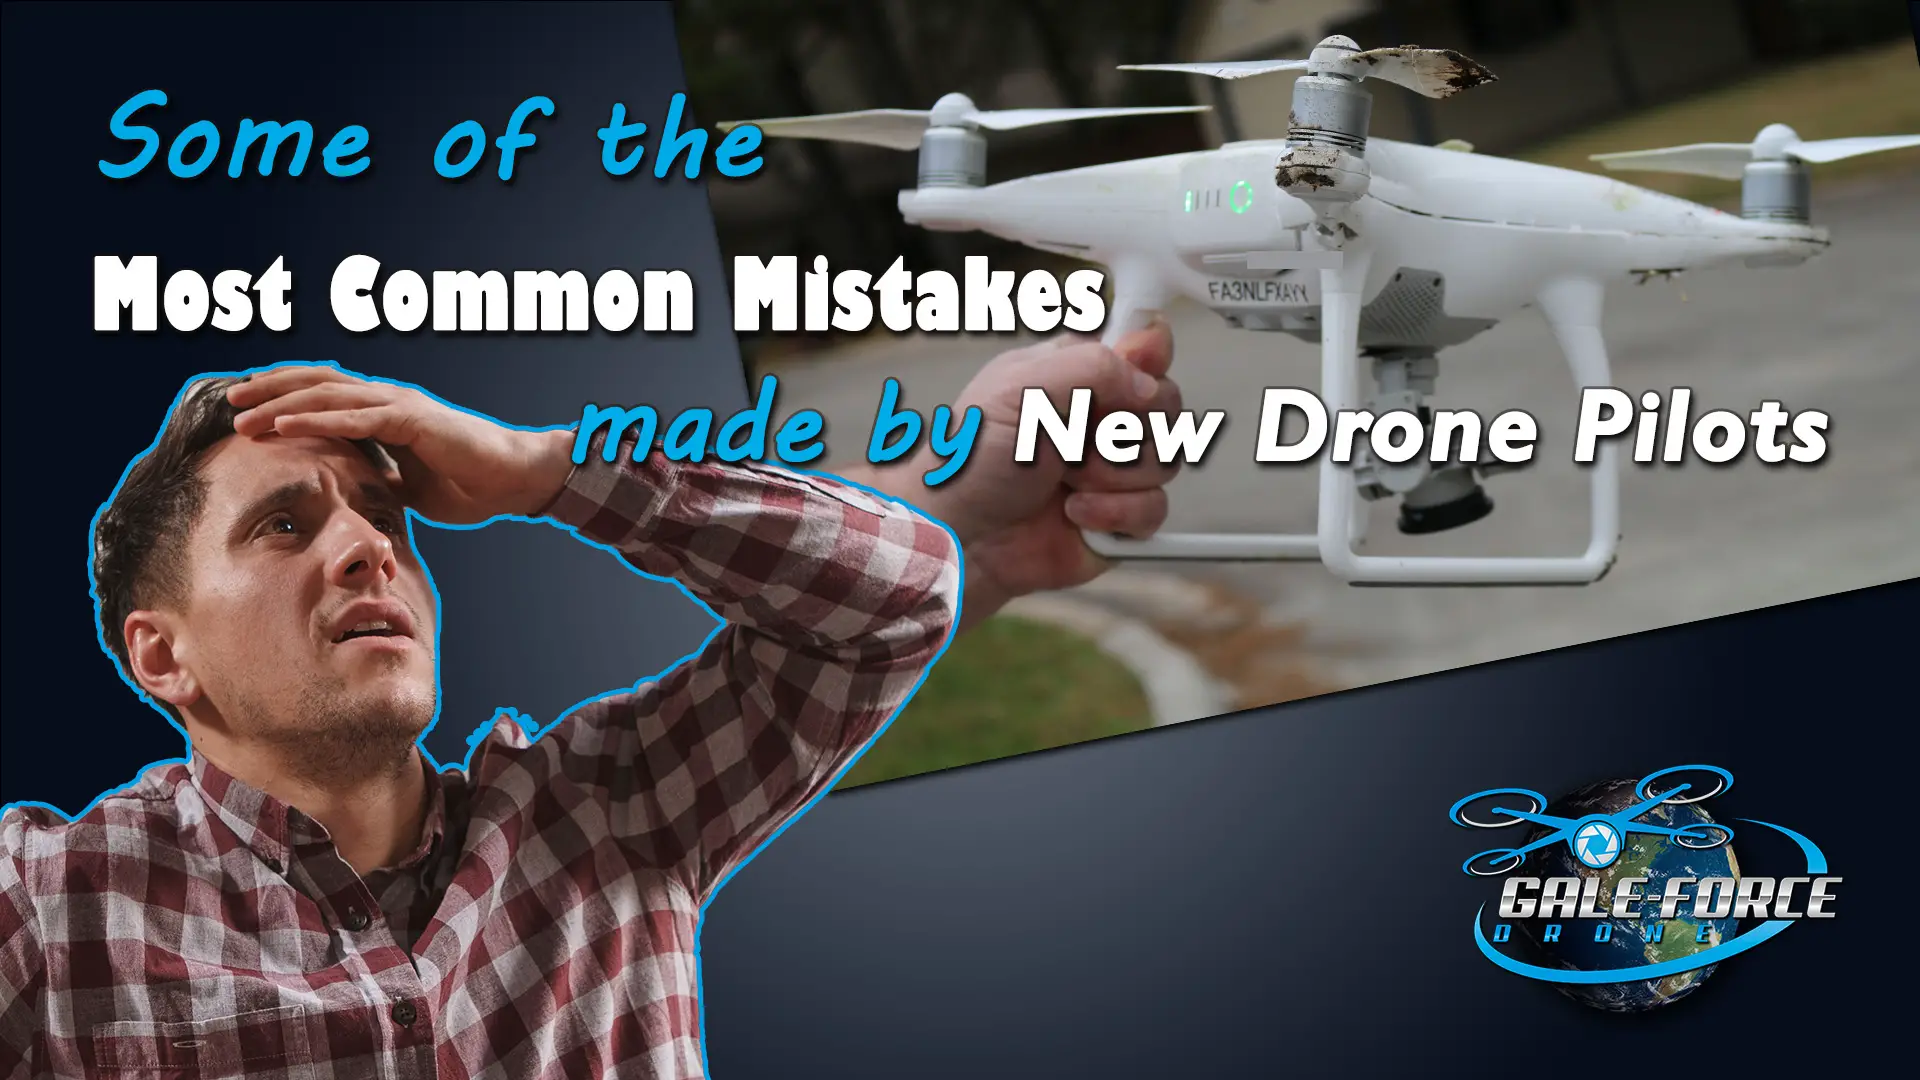 galeforcedrone common mistakes made by new drone pilots